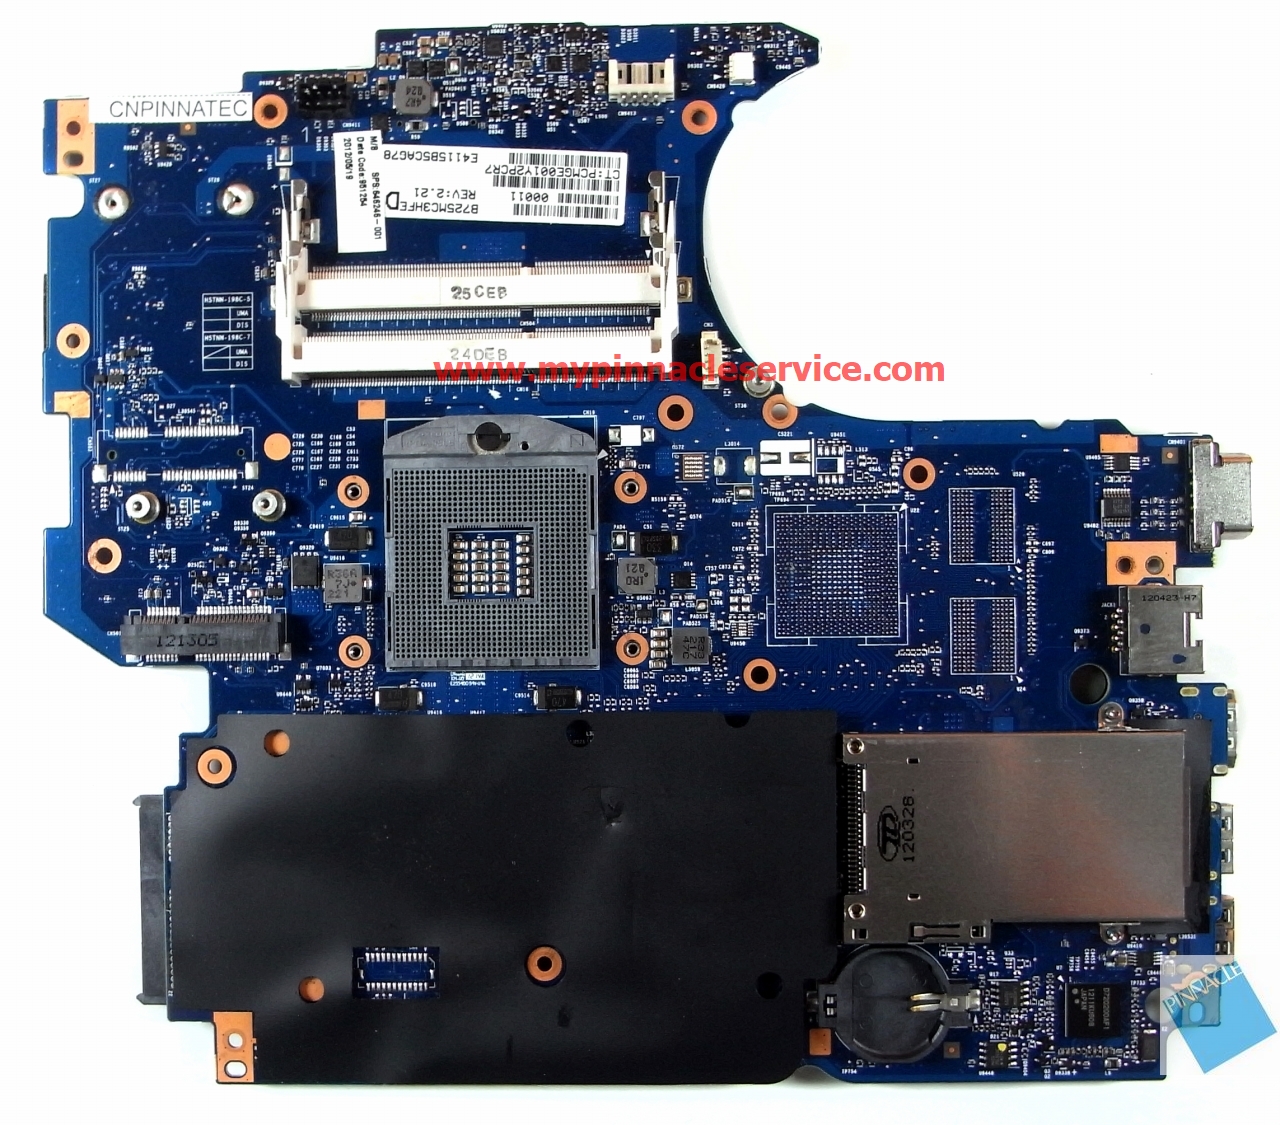 646246-001-658341-001-motherboard-for-hp-probook-4530s-4730s-6050a2465501-r0012755.jpg